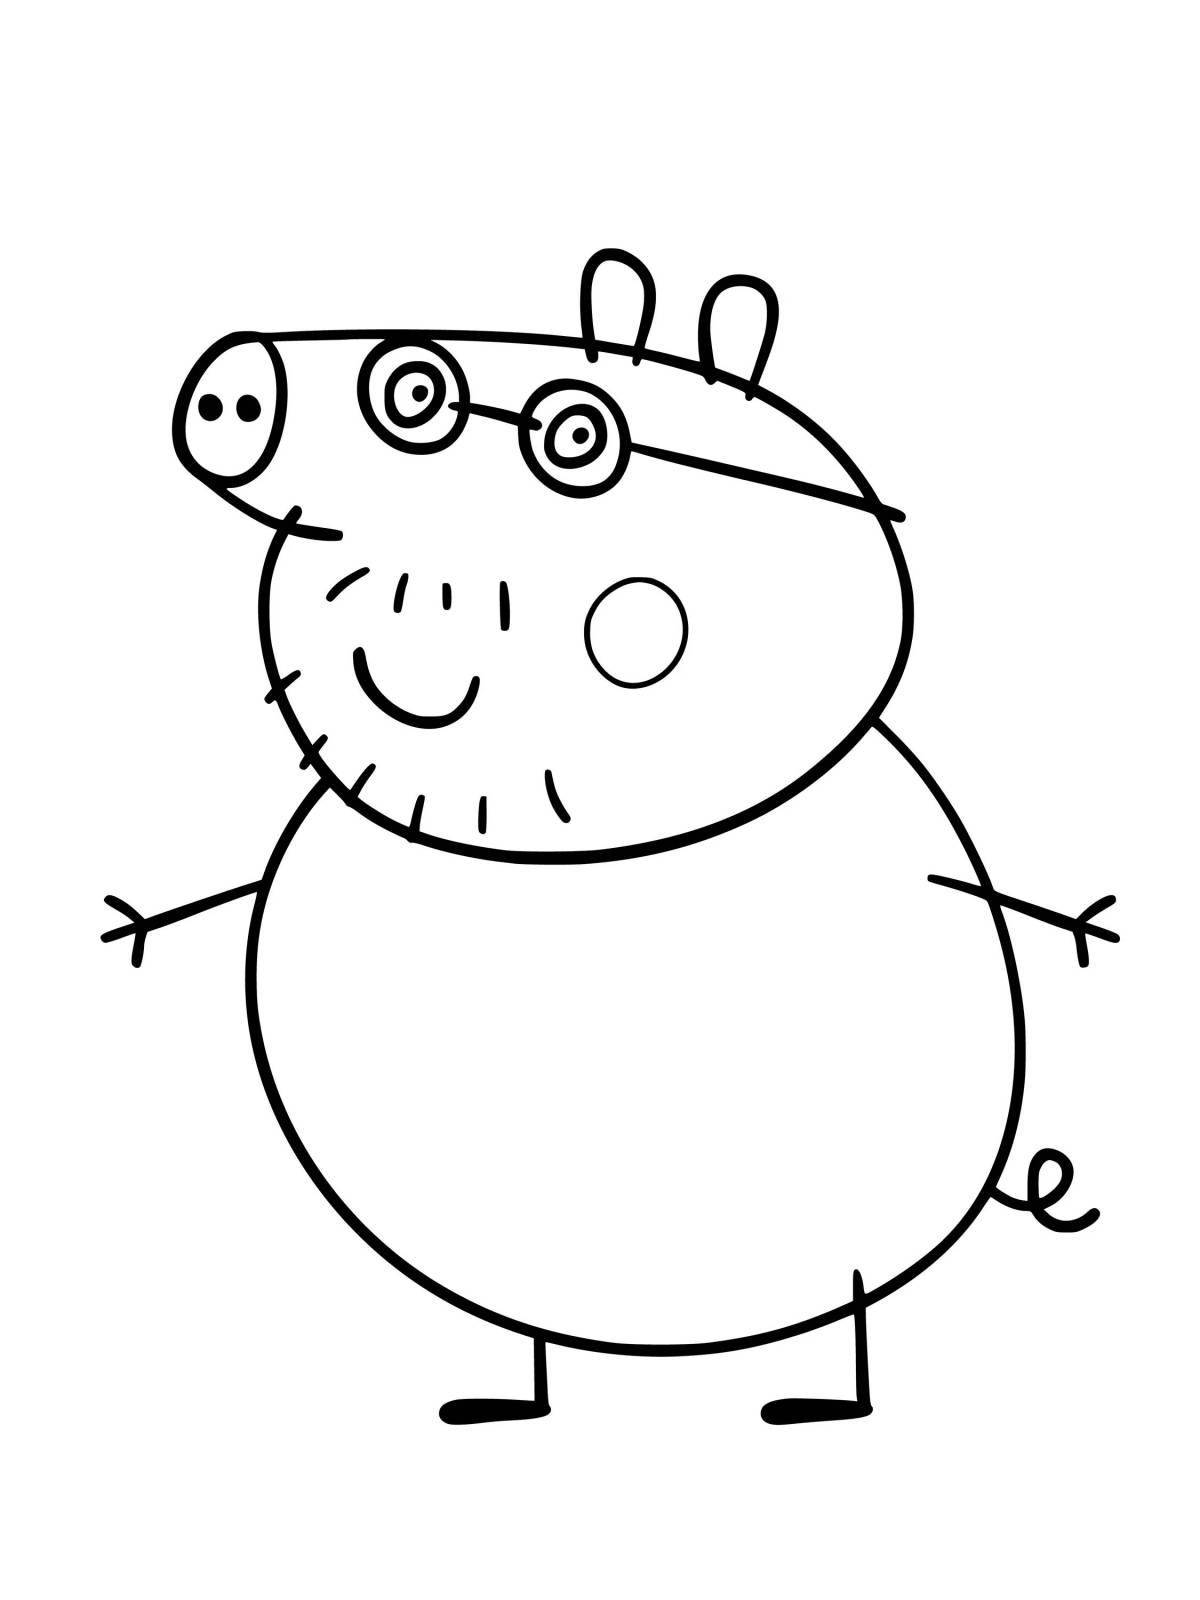 Funny daddy pig coloring book